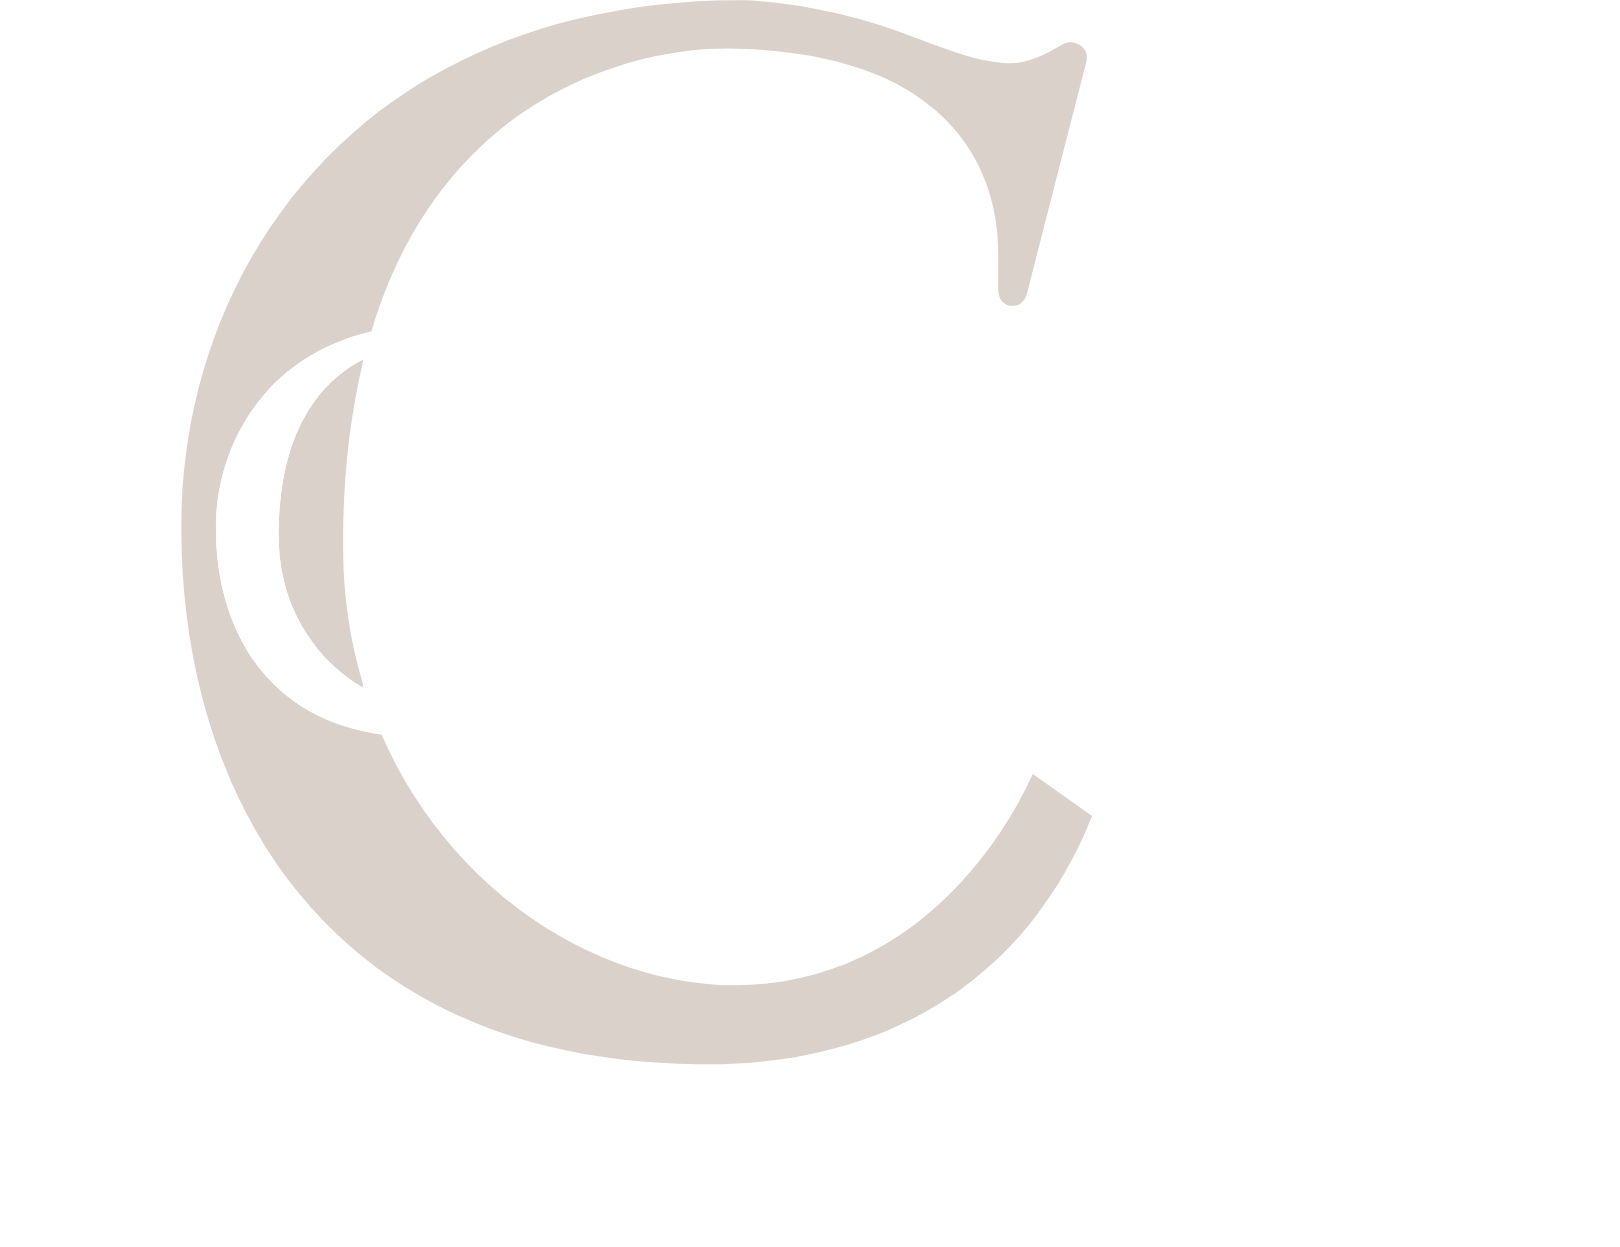 Cato Fashion logo large for dark backgrounds (transparent PNG)